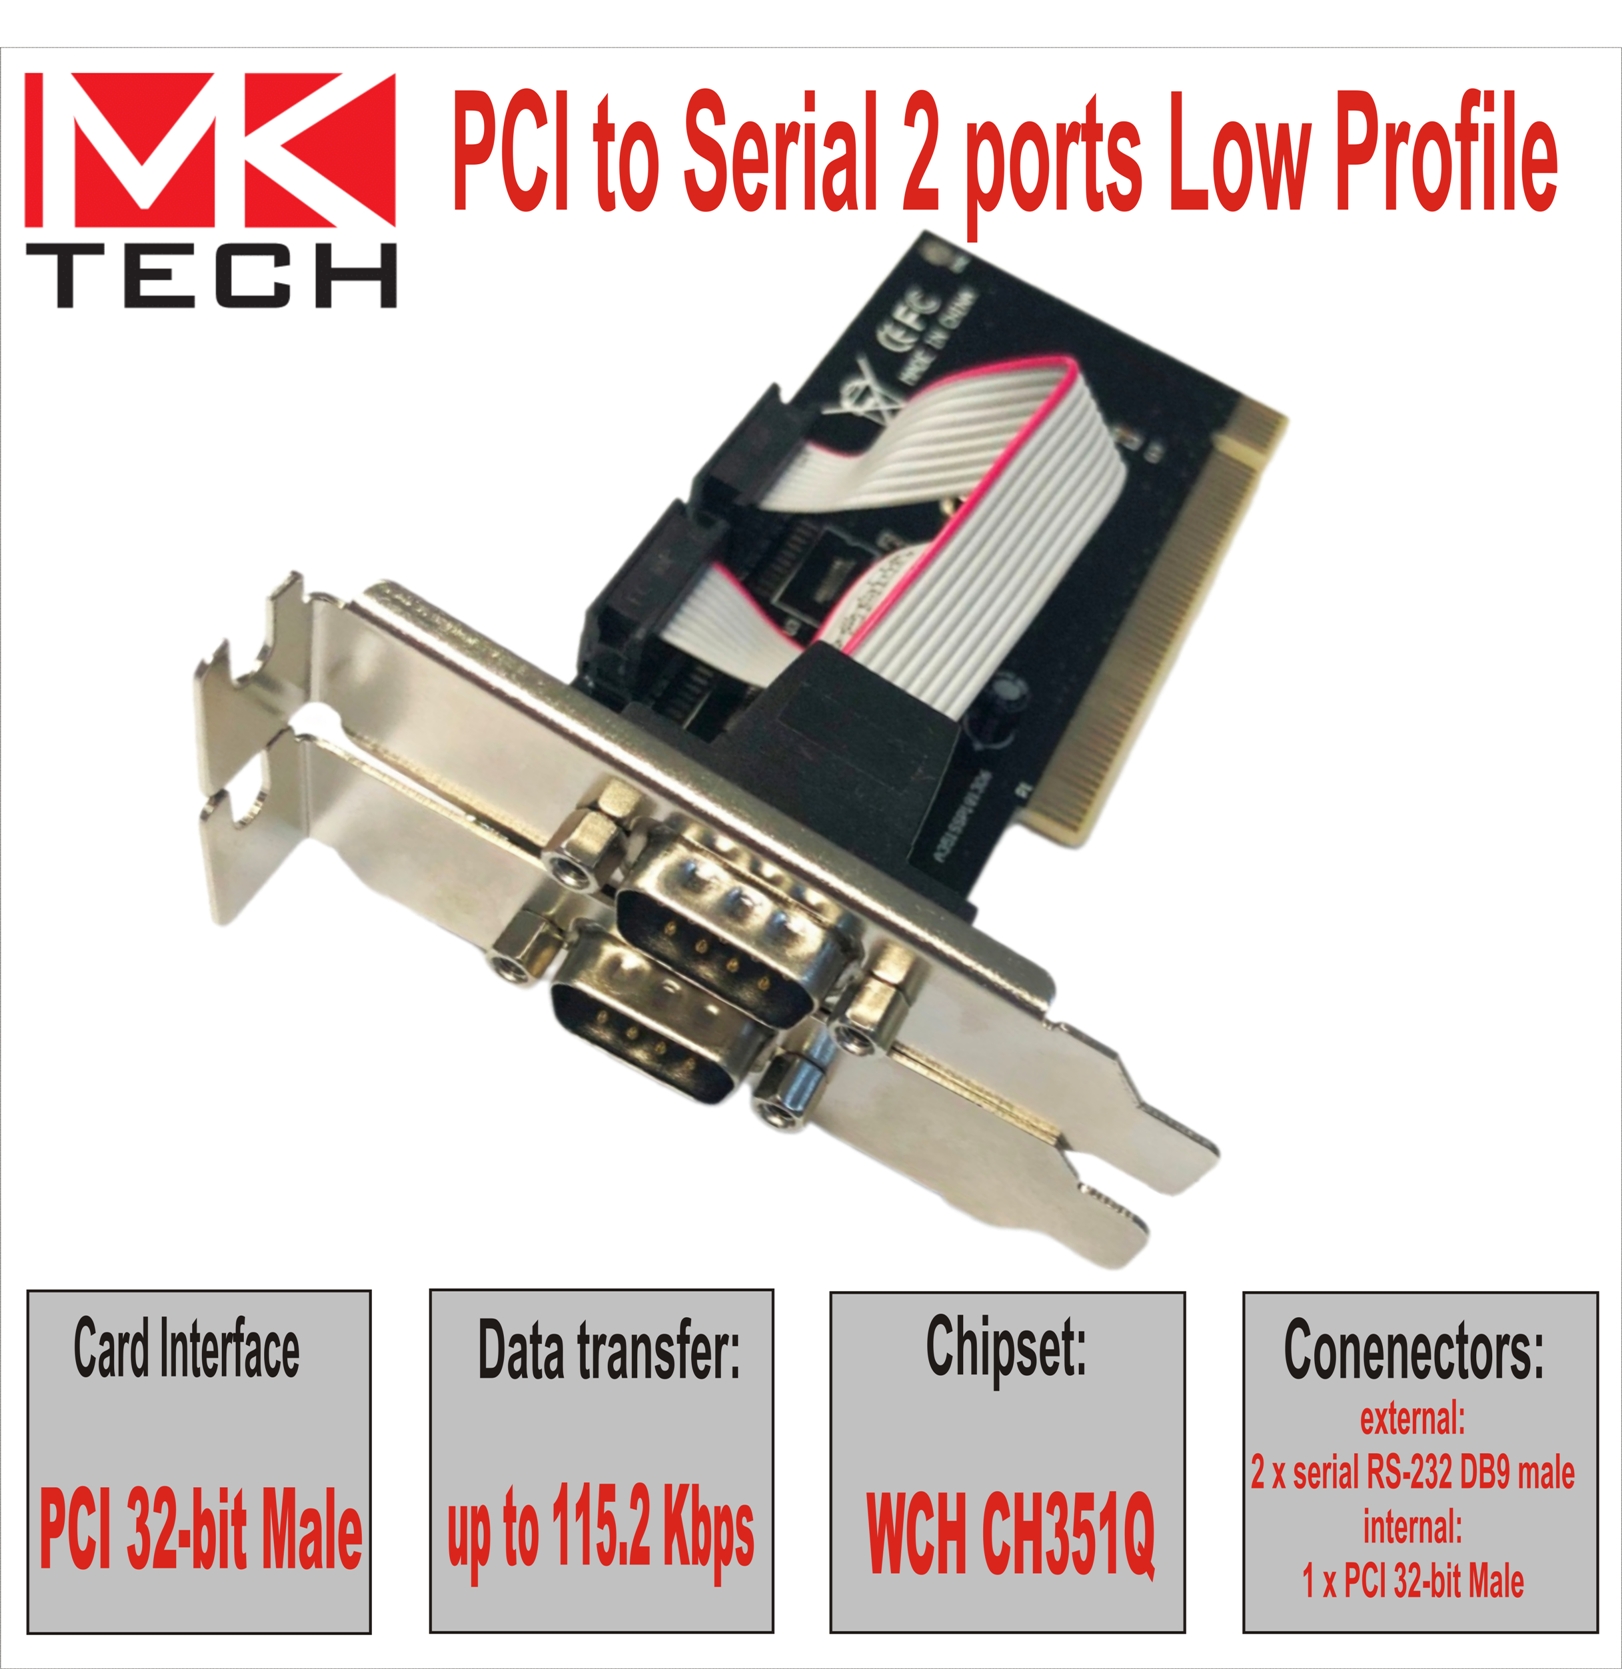 PCI to Serial 2 ports Low Profile MKTECH